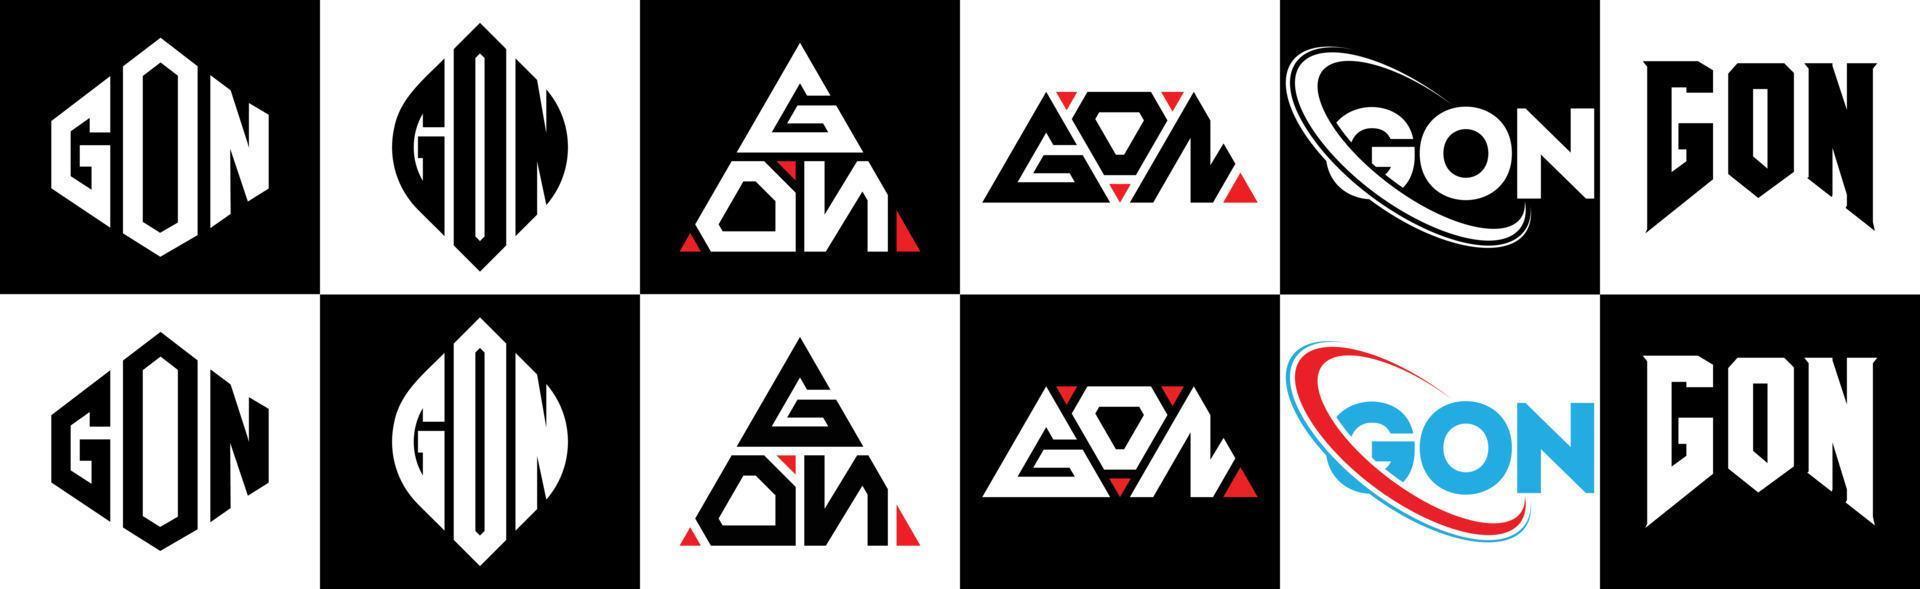 GON letter logo design in six style. GON polygon, circle, triangle, hexagon, flat and simple style with black and white color variation letter logo set in one artboard. GON minimalist and classic logo vector